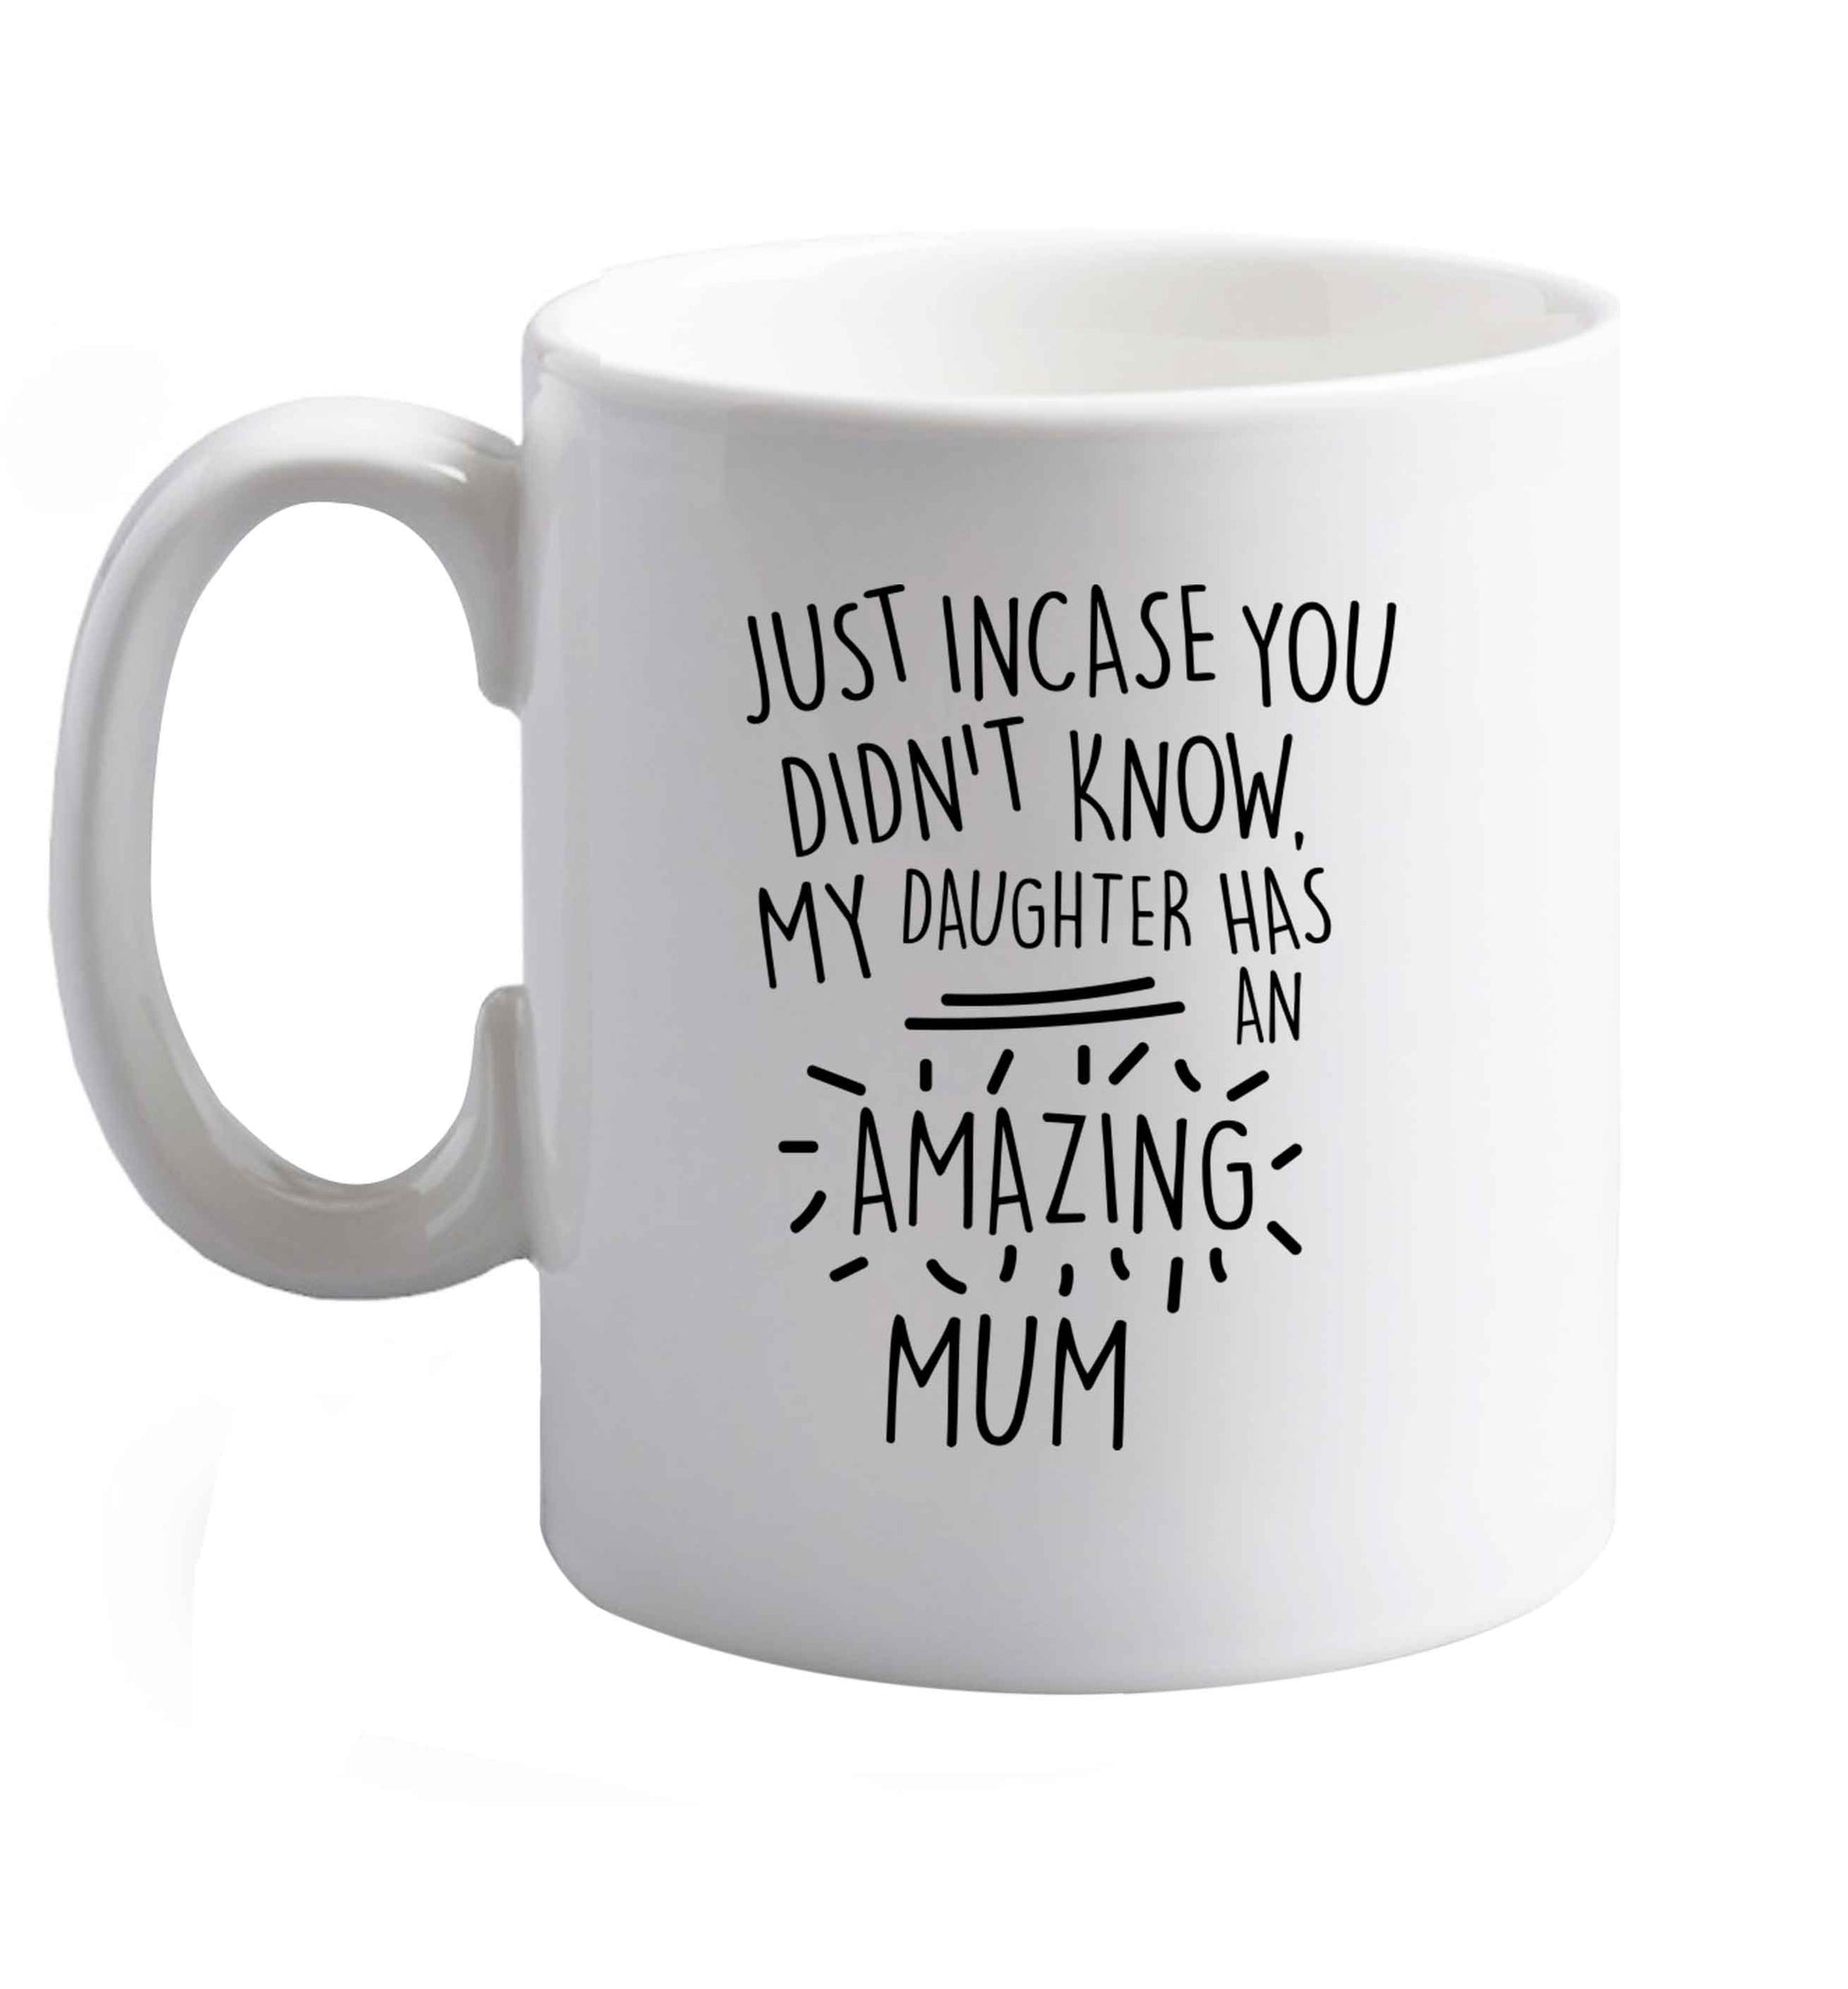 10 oz Just incase you didn't know my daughter has an amazing mum ceramic mug right handed